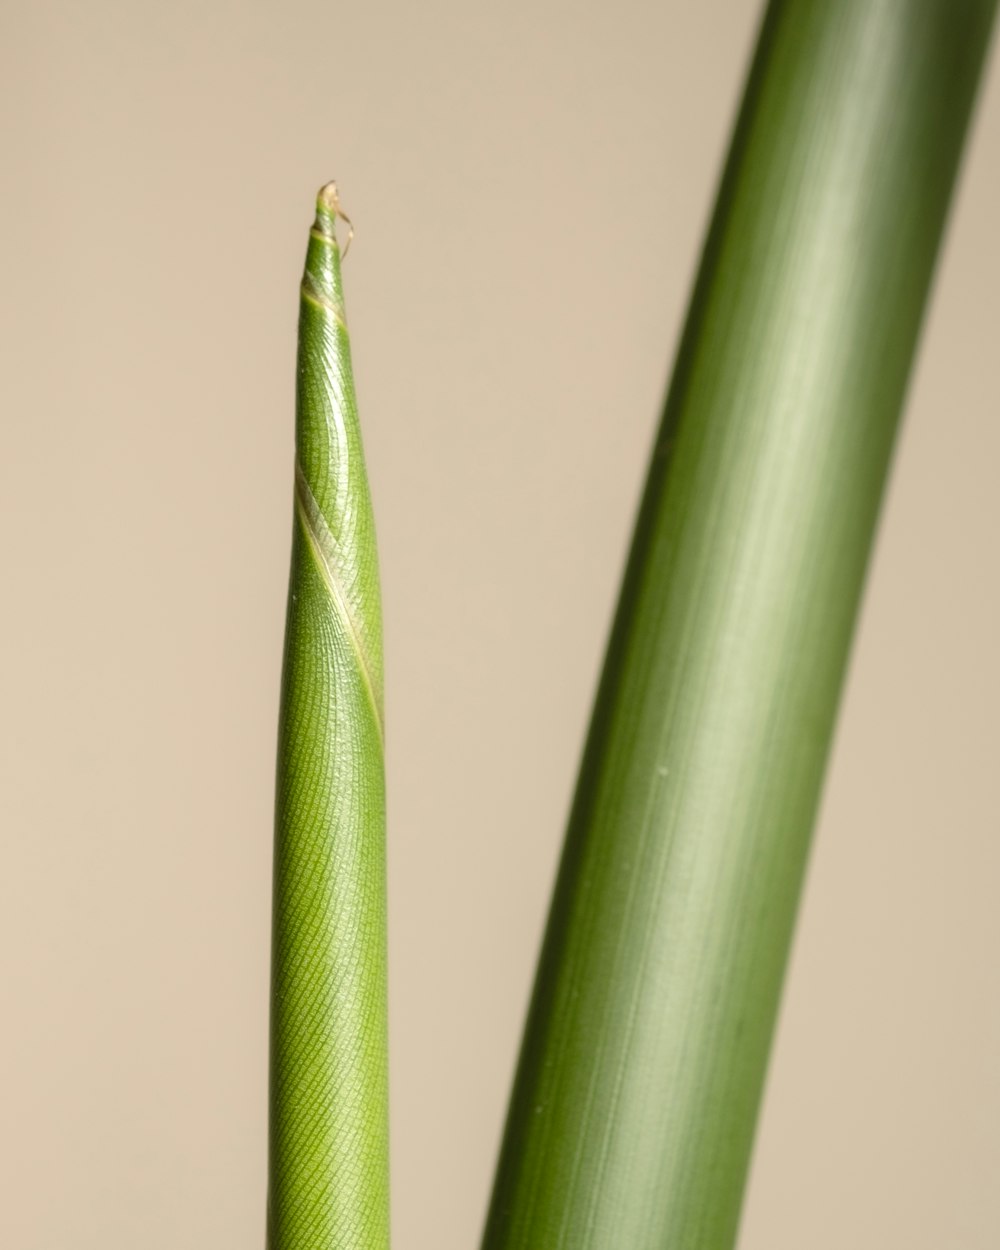 a close up of a green stem of a plant